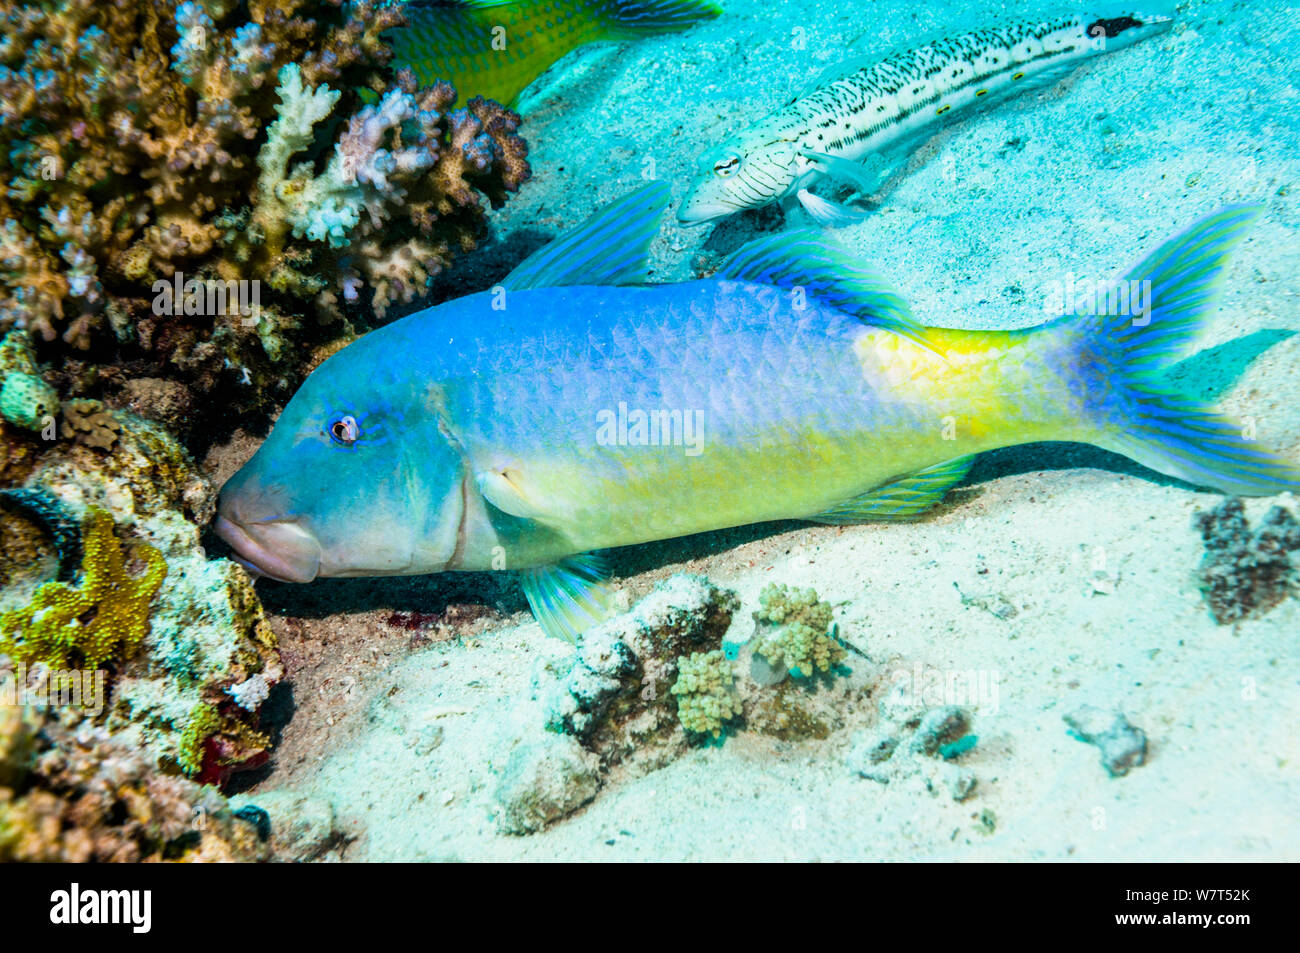 Yellowsaddle goatfish (Parupeneus cyclostomus) hunting small prey in coral branches. Egypt, Red Sea. Stock Photo